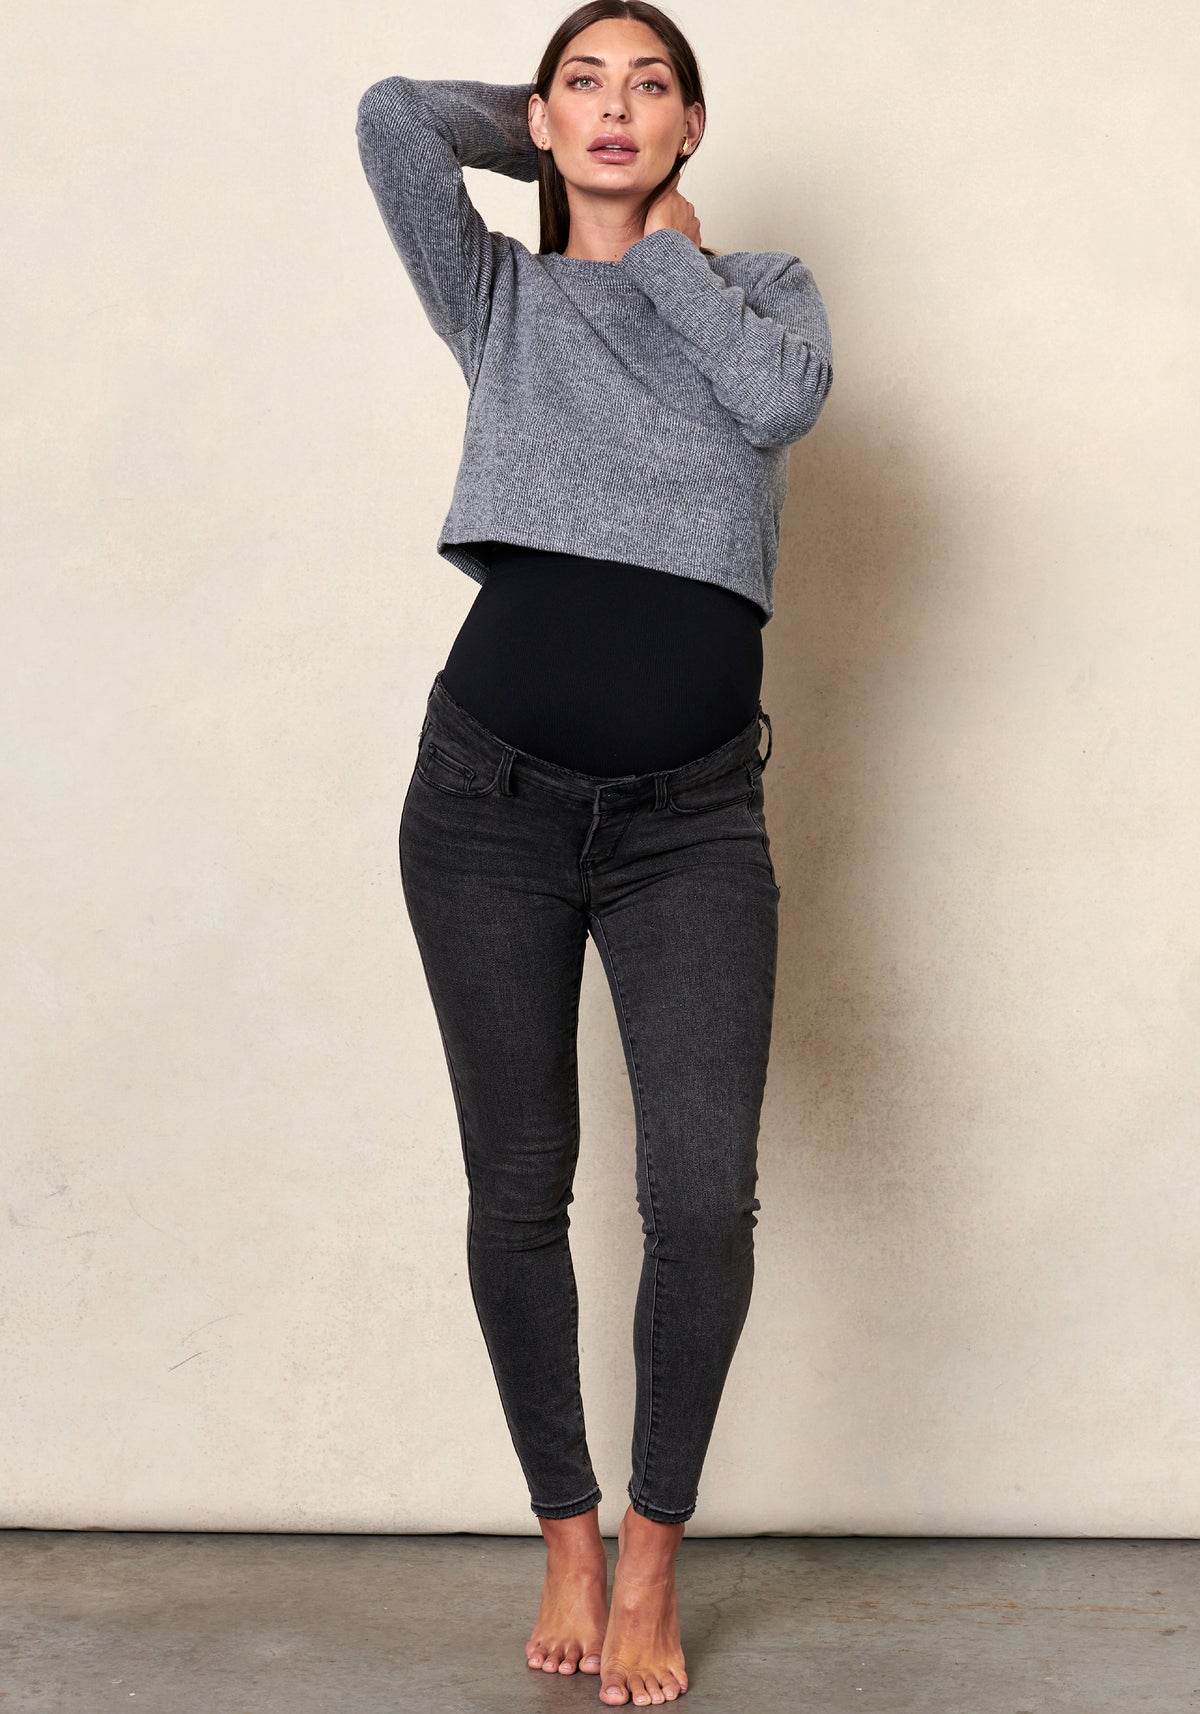 Maternity Denim Jeans With Ripped Design For Nursing And Comfortable Belly  Thick Maternity Leggings From Bakacutie, $21.04